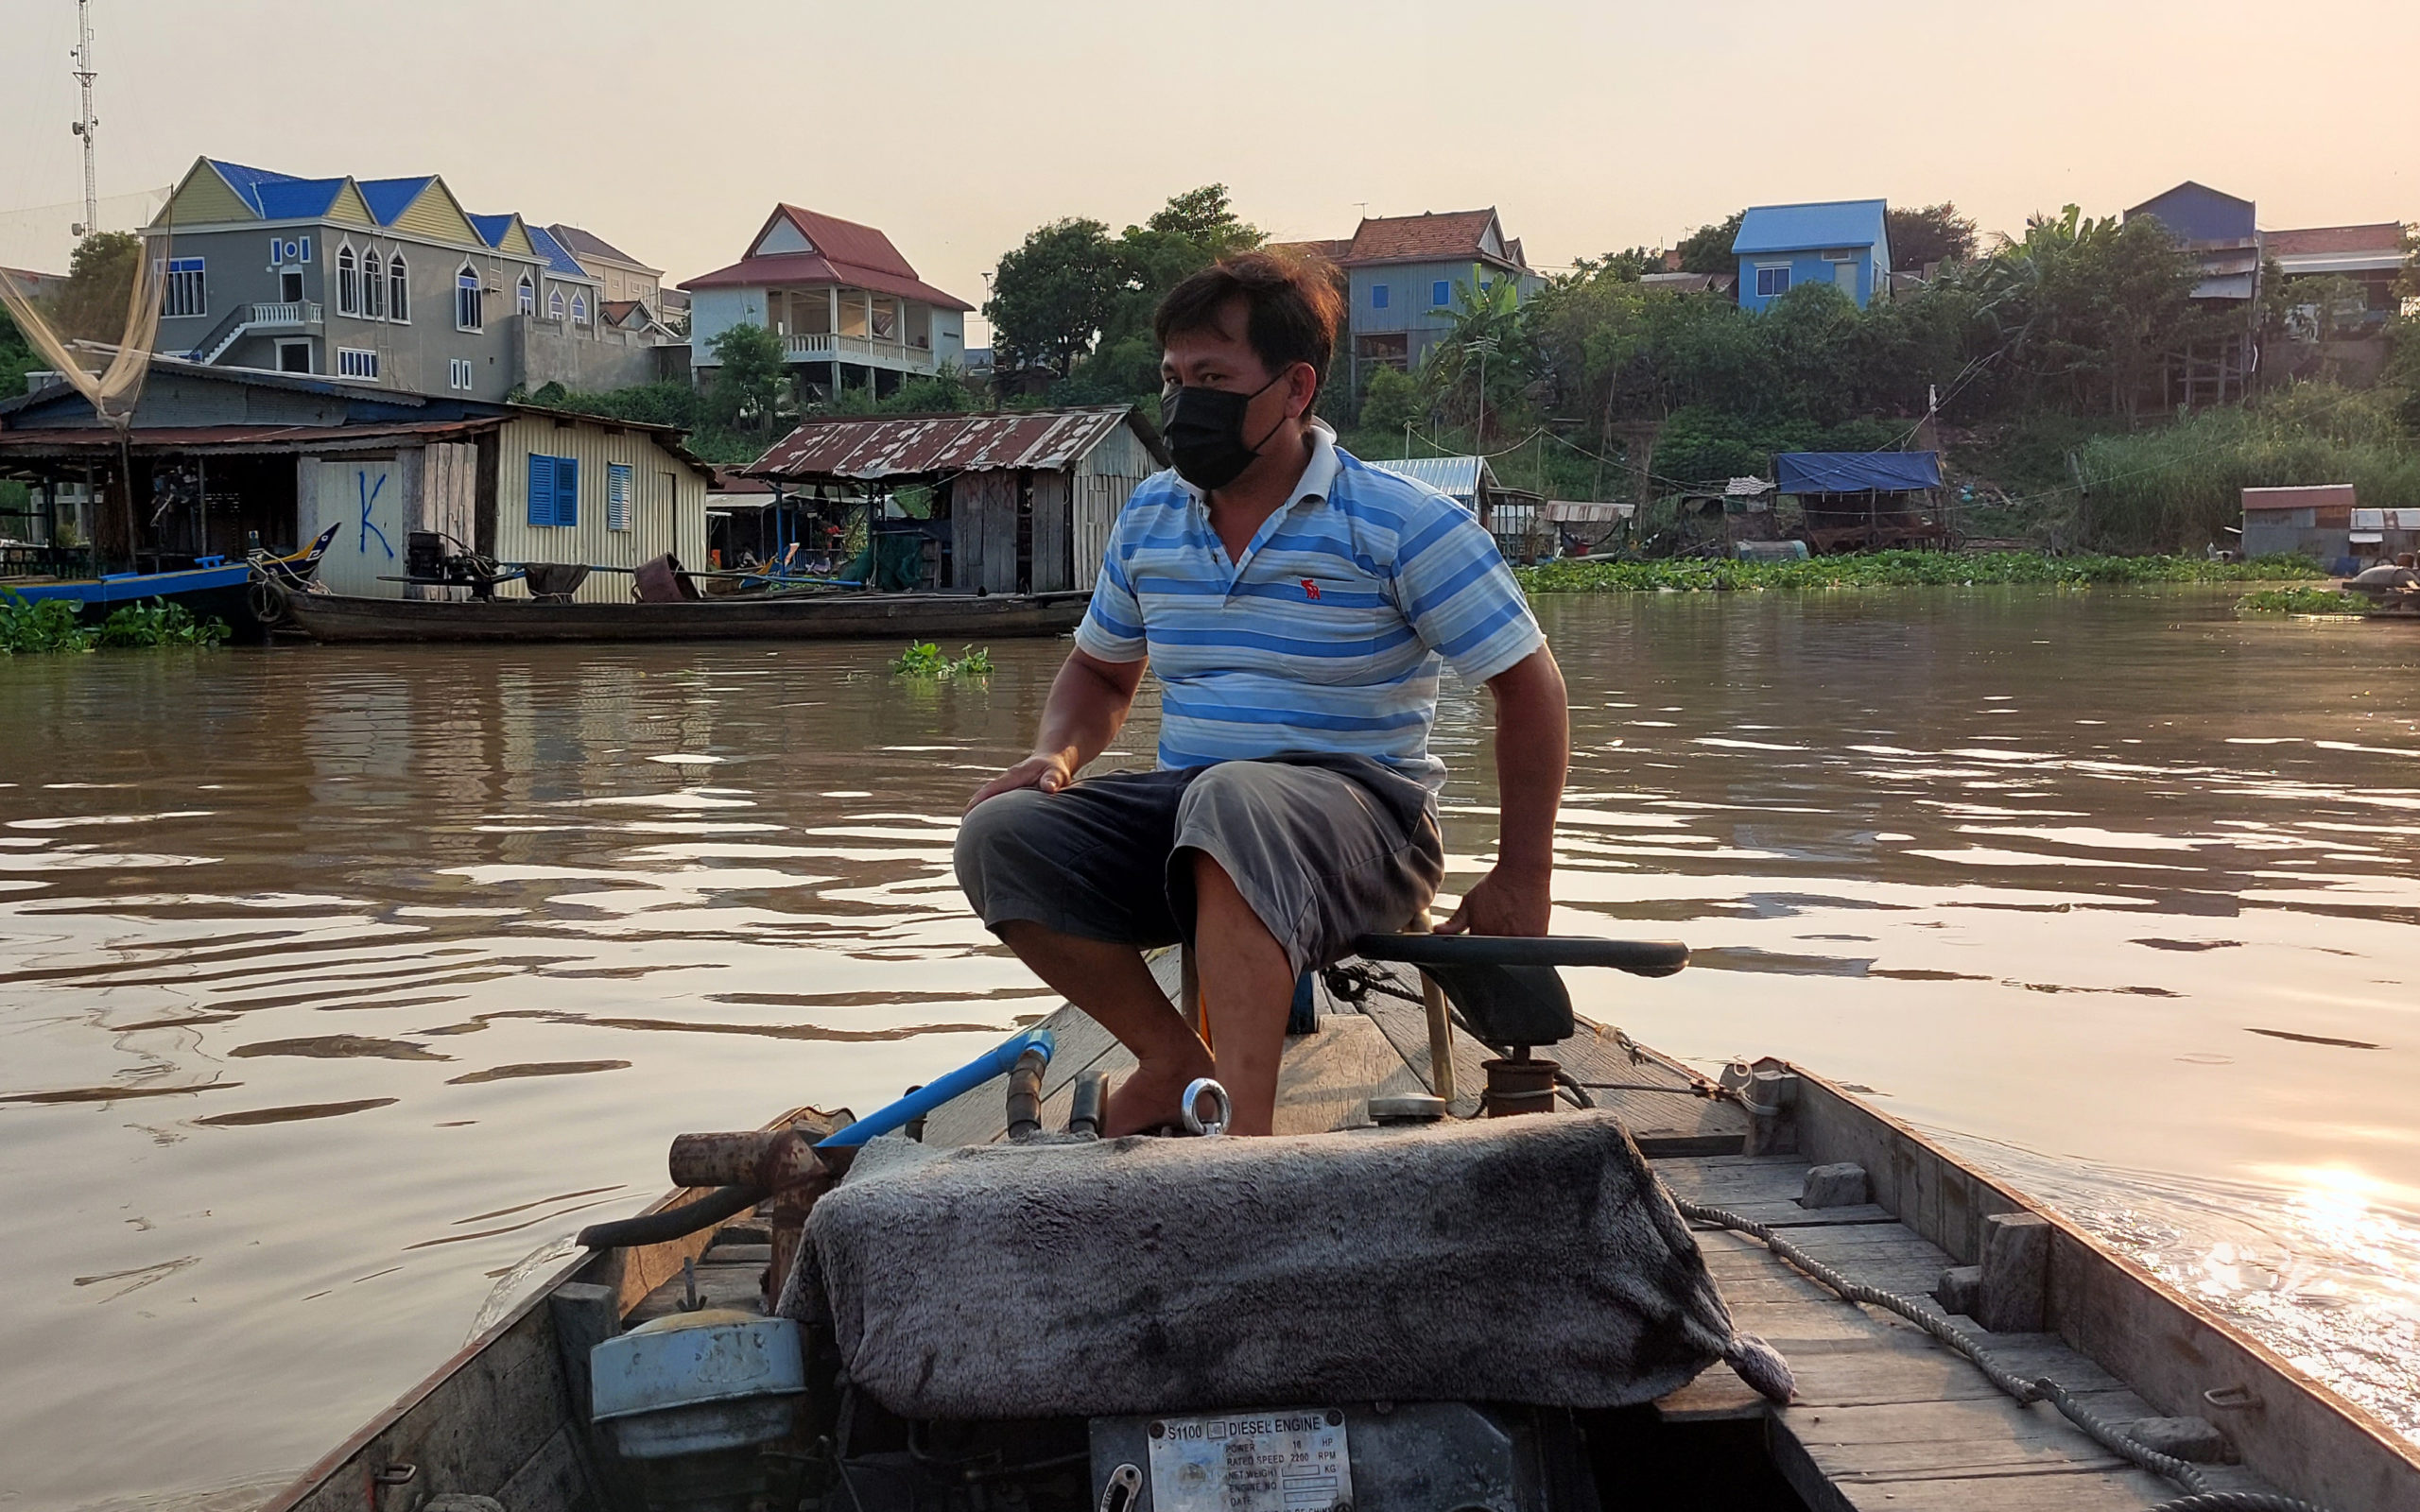 Yor Yeng Tam, 45, steers his motorized boat between floating houses and dai on the Tonle Sap river in Phnom Penh's Prek Pnov district on March 15, 2022. (Danielle Keeton-Olsen/VOD)